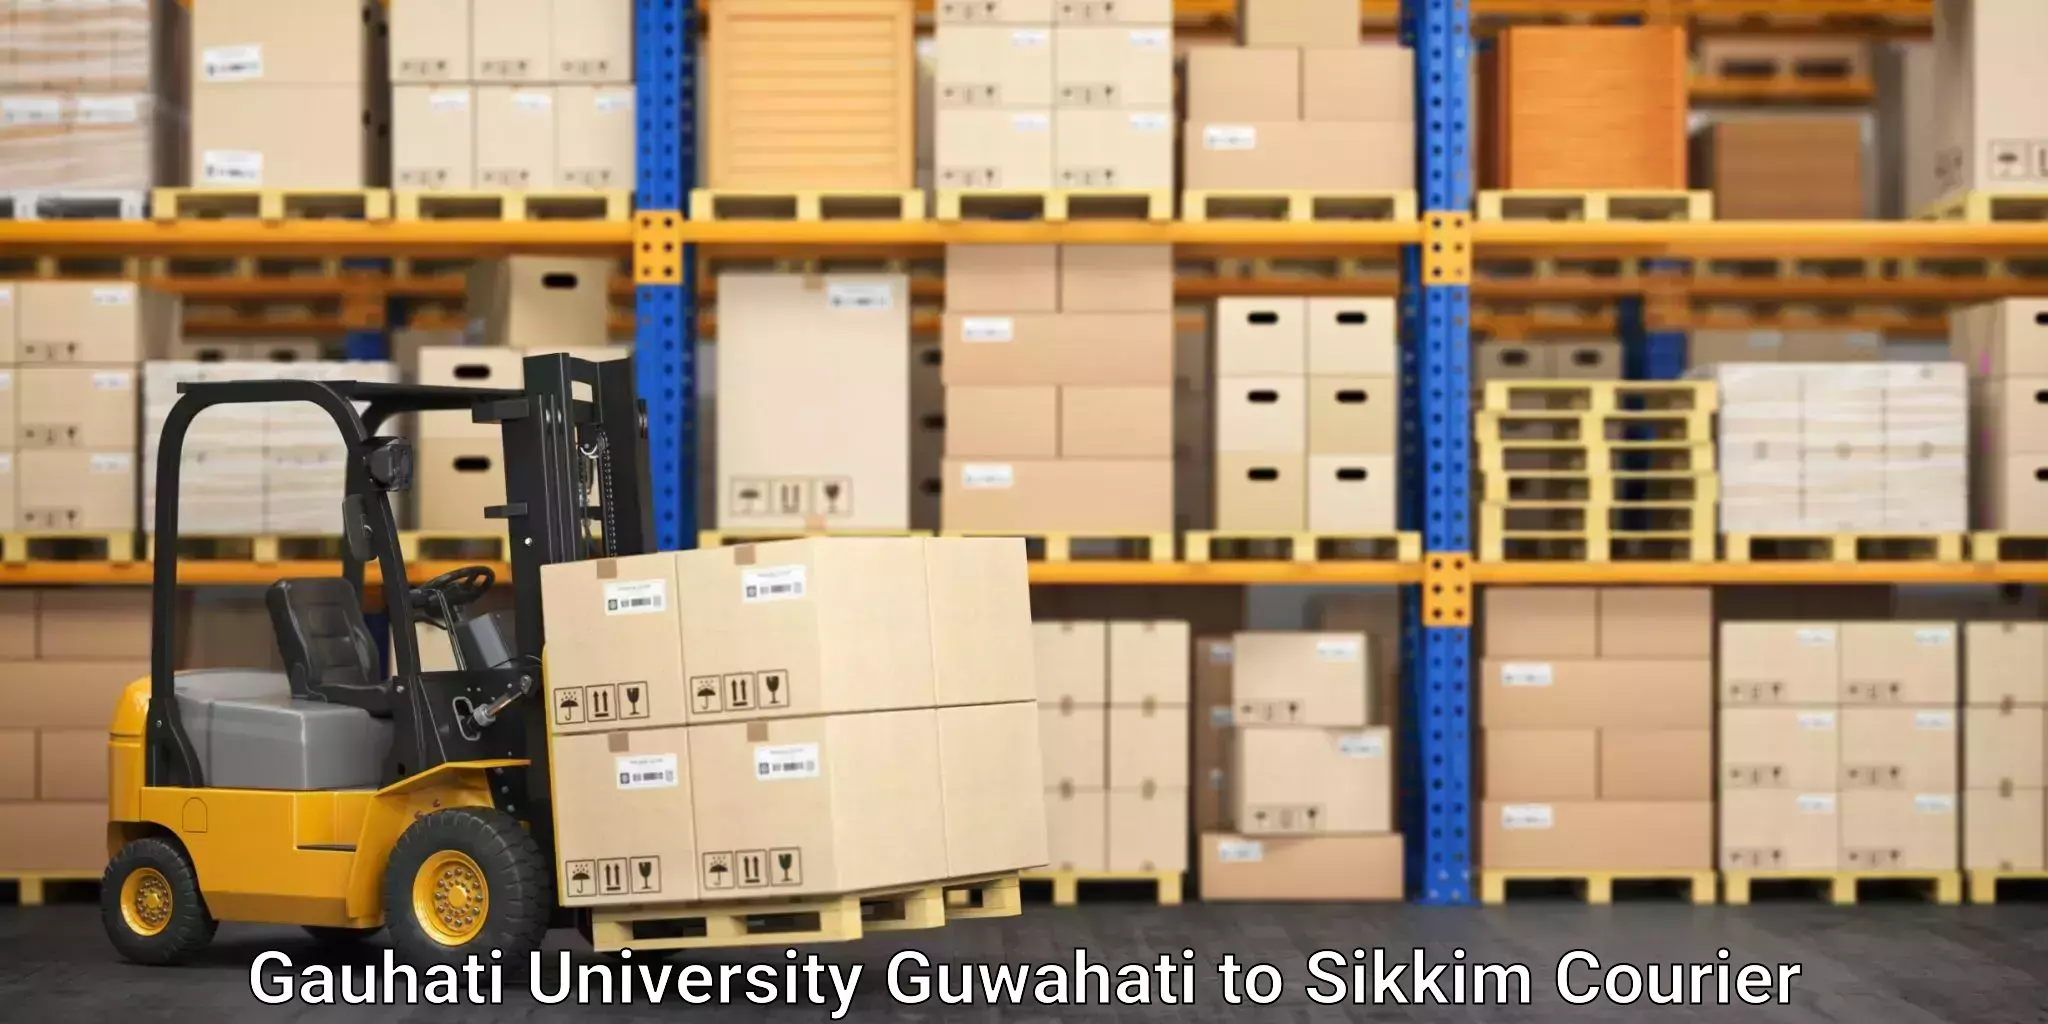 Professional parcel services in Gauhati University Guwahati to Pelling